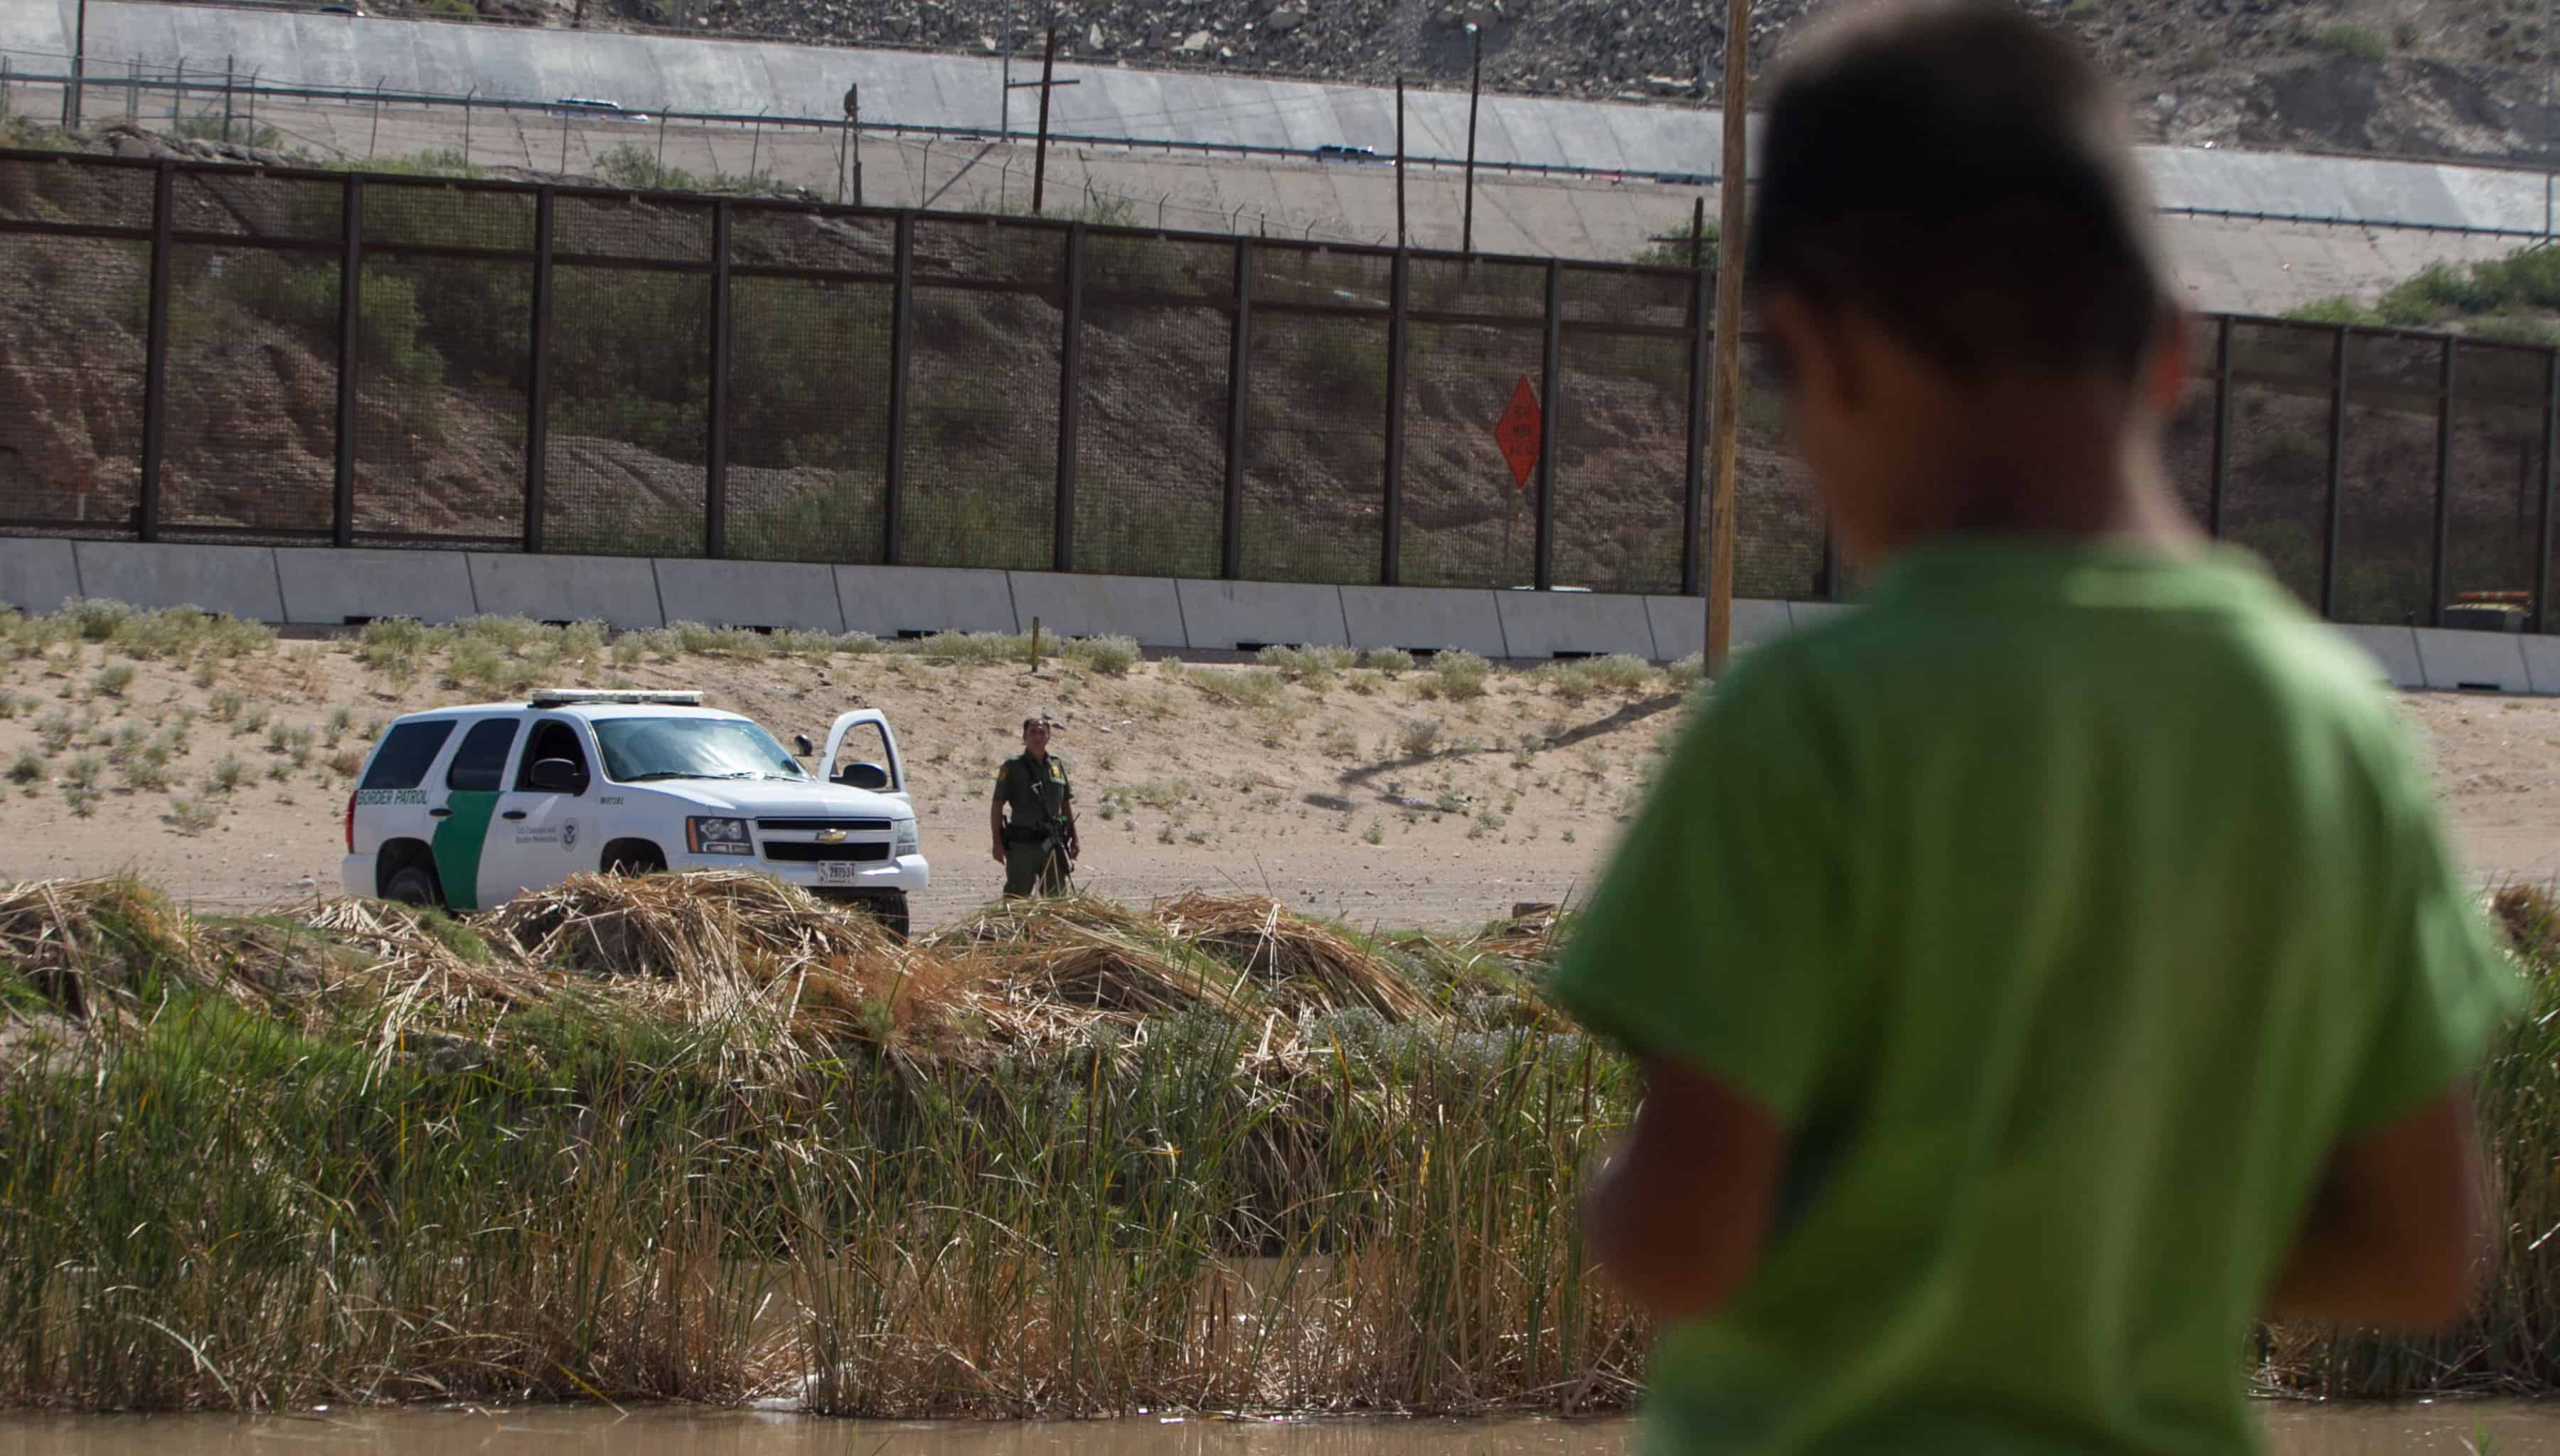 A Mexican boy looks at a member of the U.S. Border Patrol standing guard on the border between El Paso in the United States and Ciudad Juárez in Mexico, on July 22, 2014.